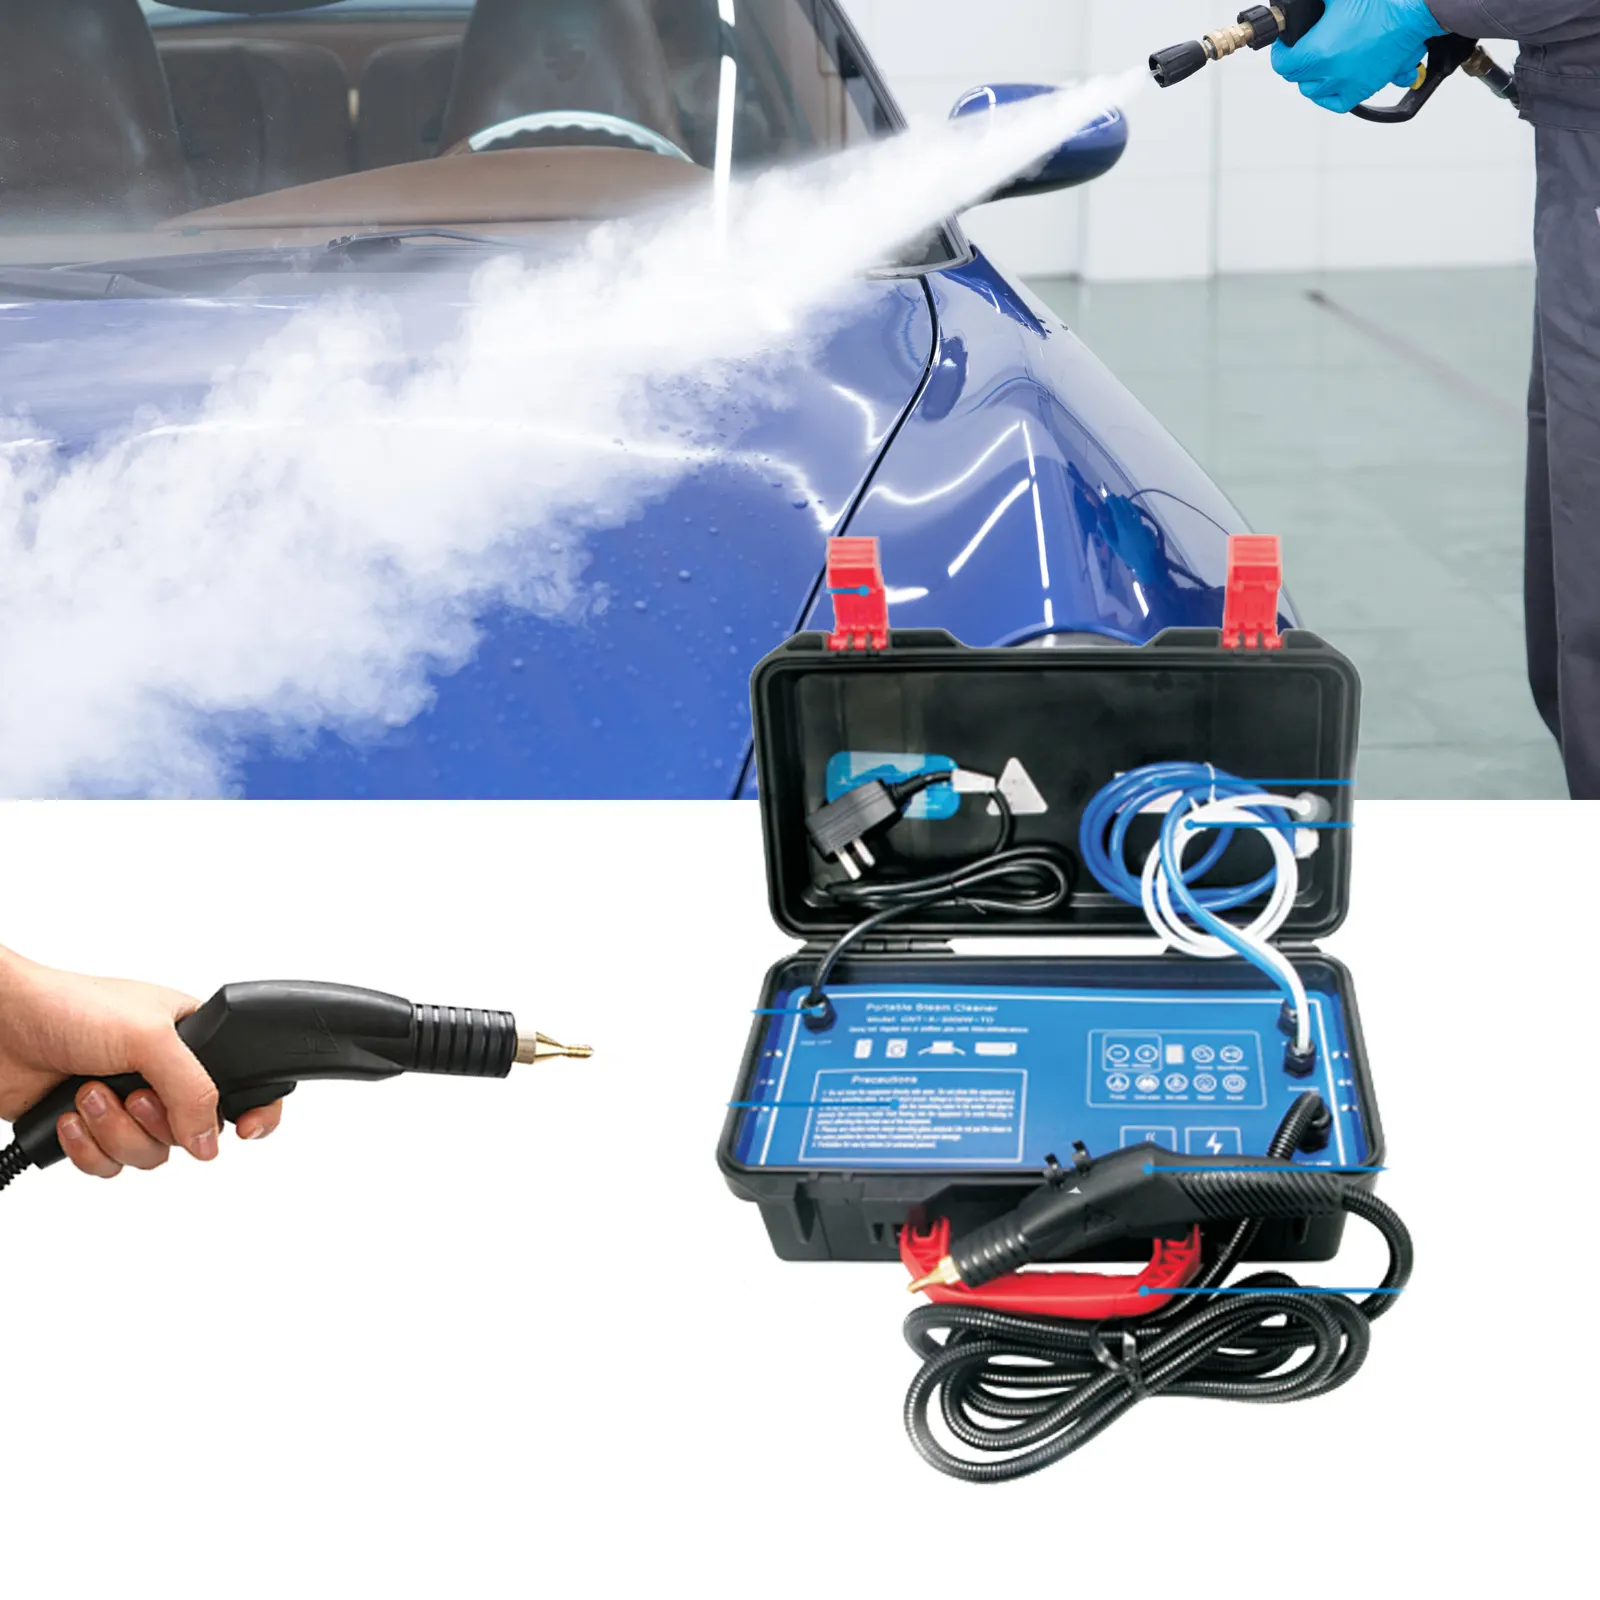 Professional home car wash machine car use cleaning steamer portable pressure steam cleaner with tool case